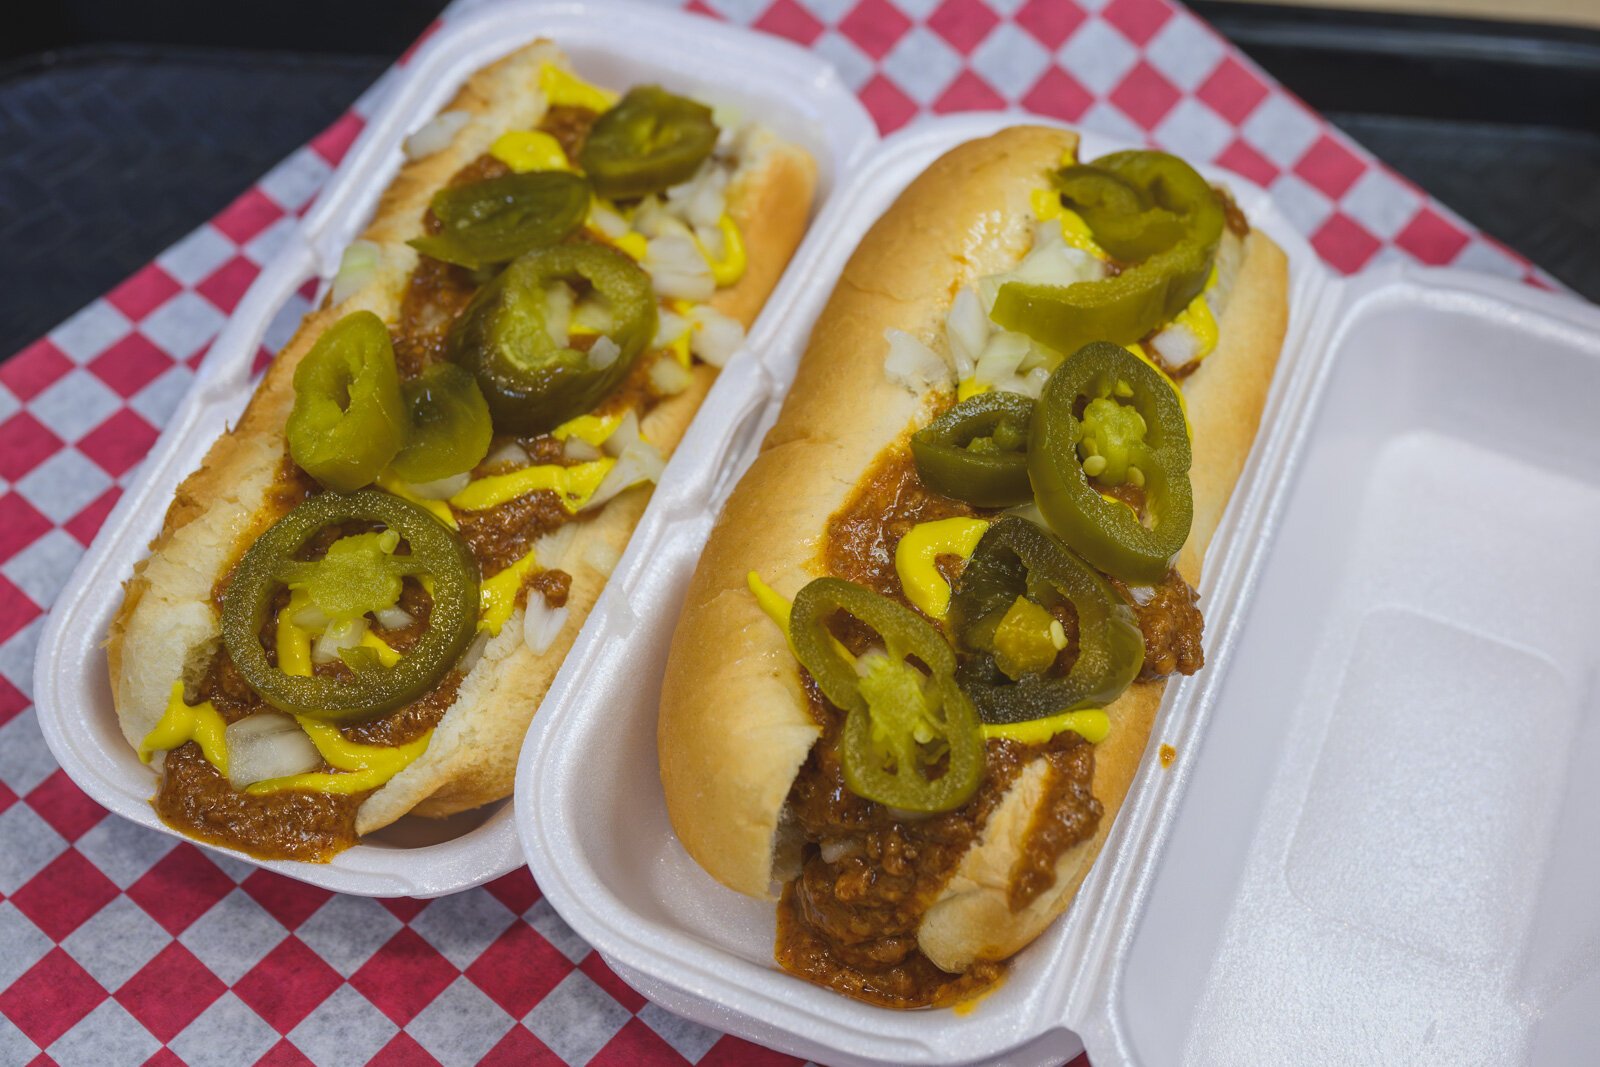 Coney dogs with jalapenos at Speedy's Big Burgers.